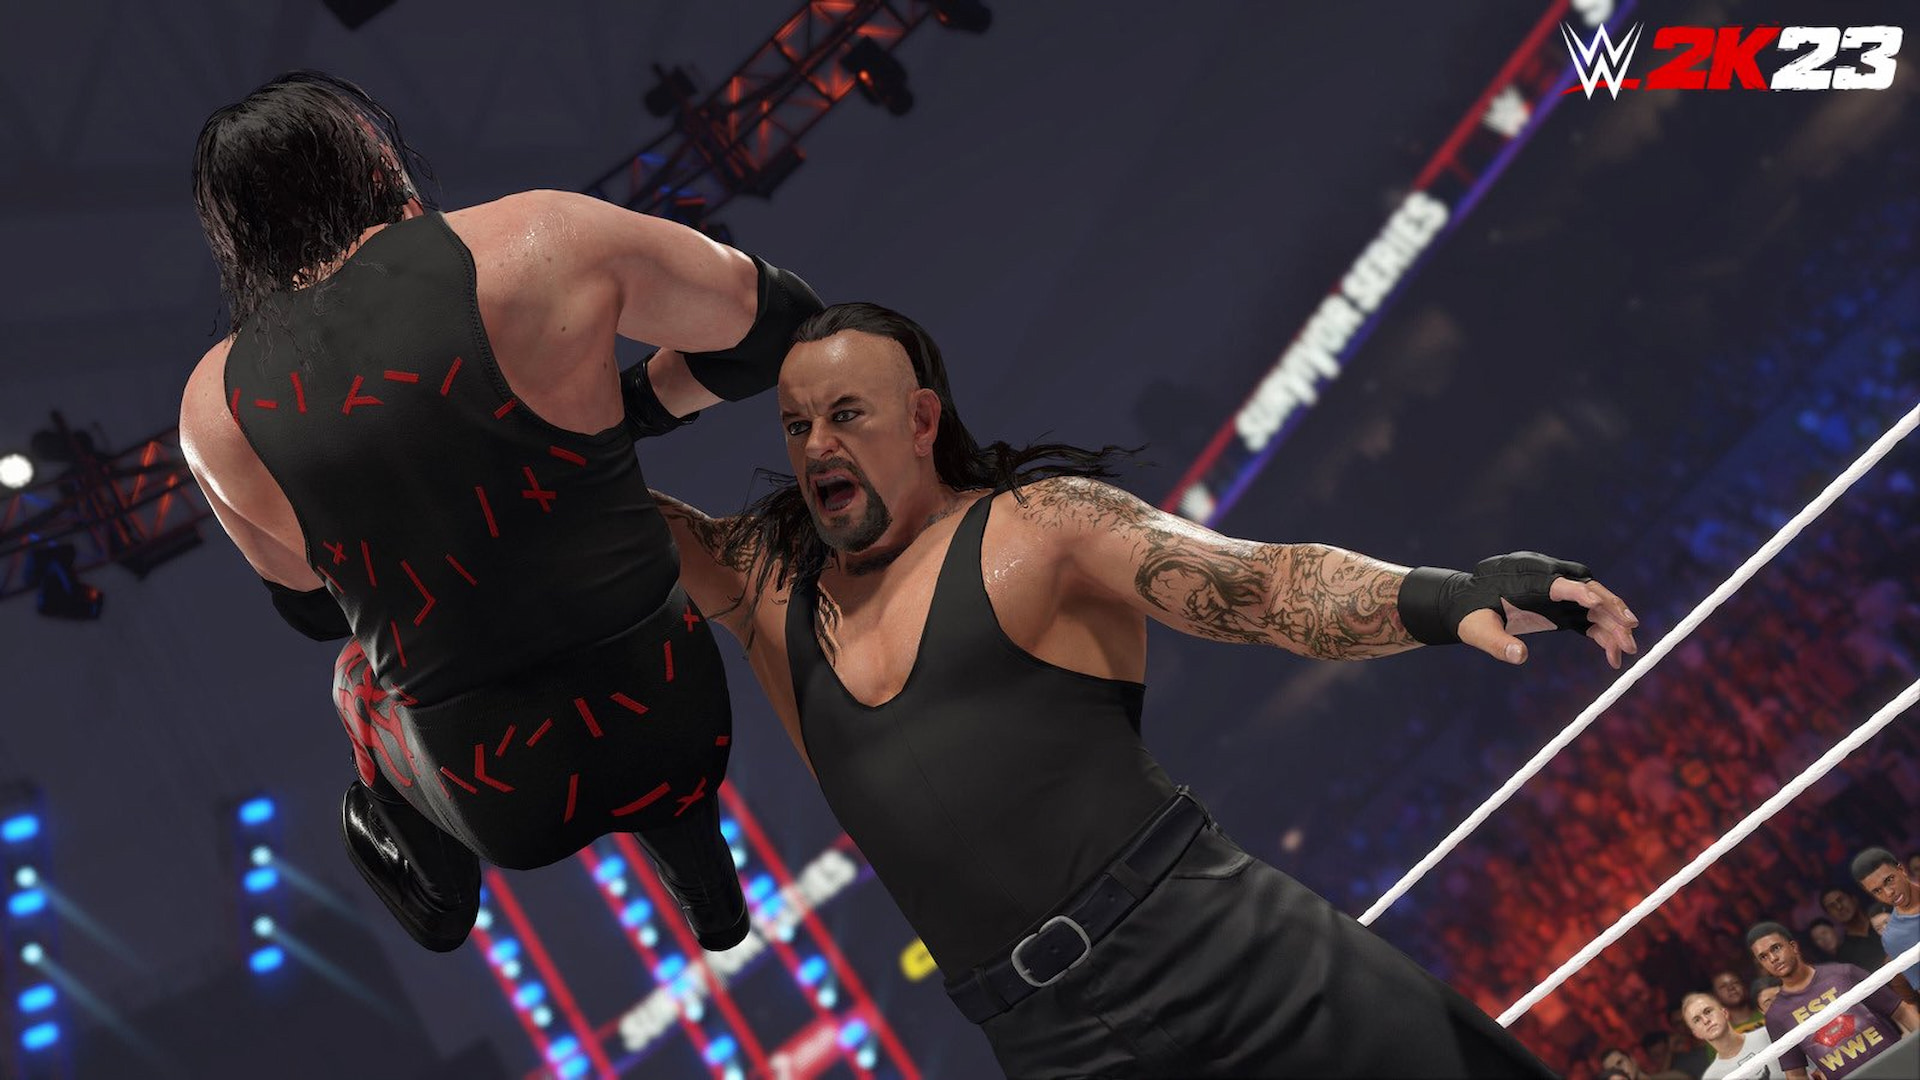 WWE2K23 on X: The full #WWE2K20 roster is live! Who are your